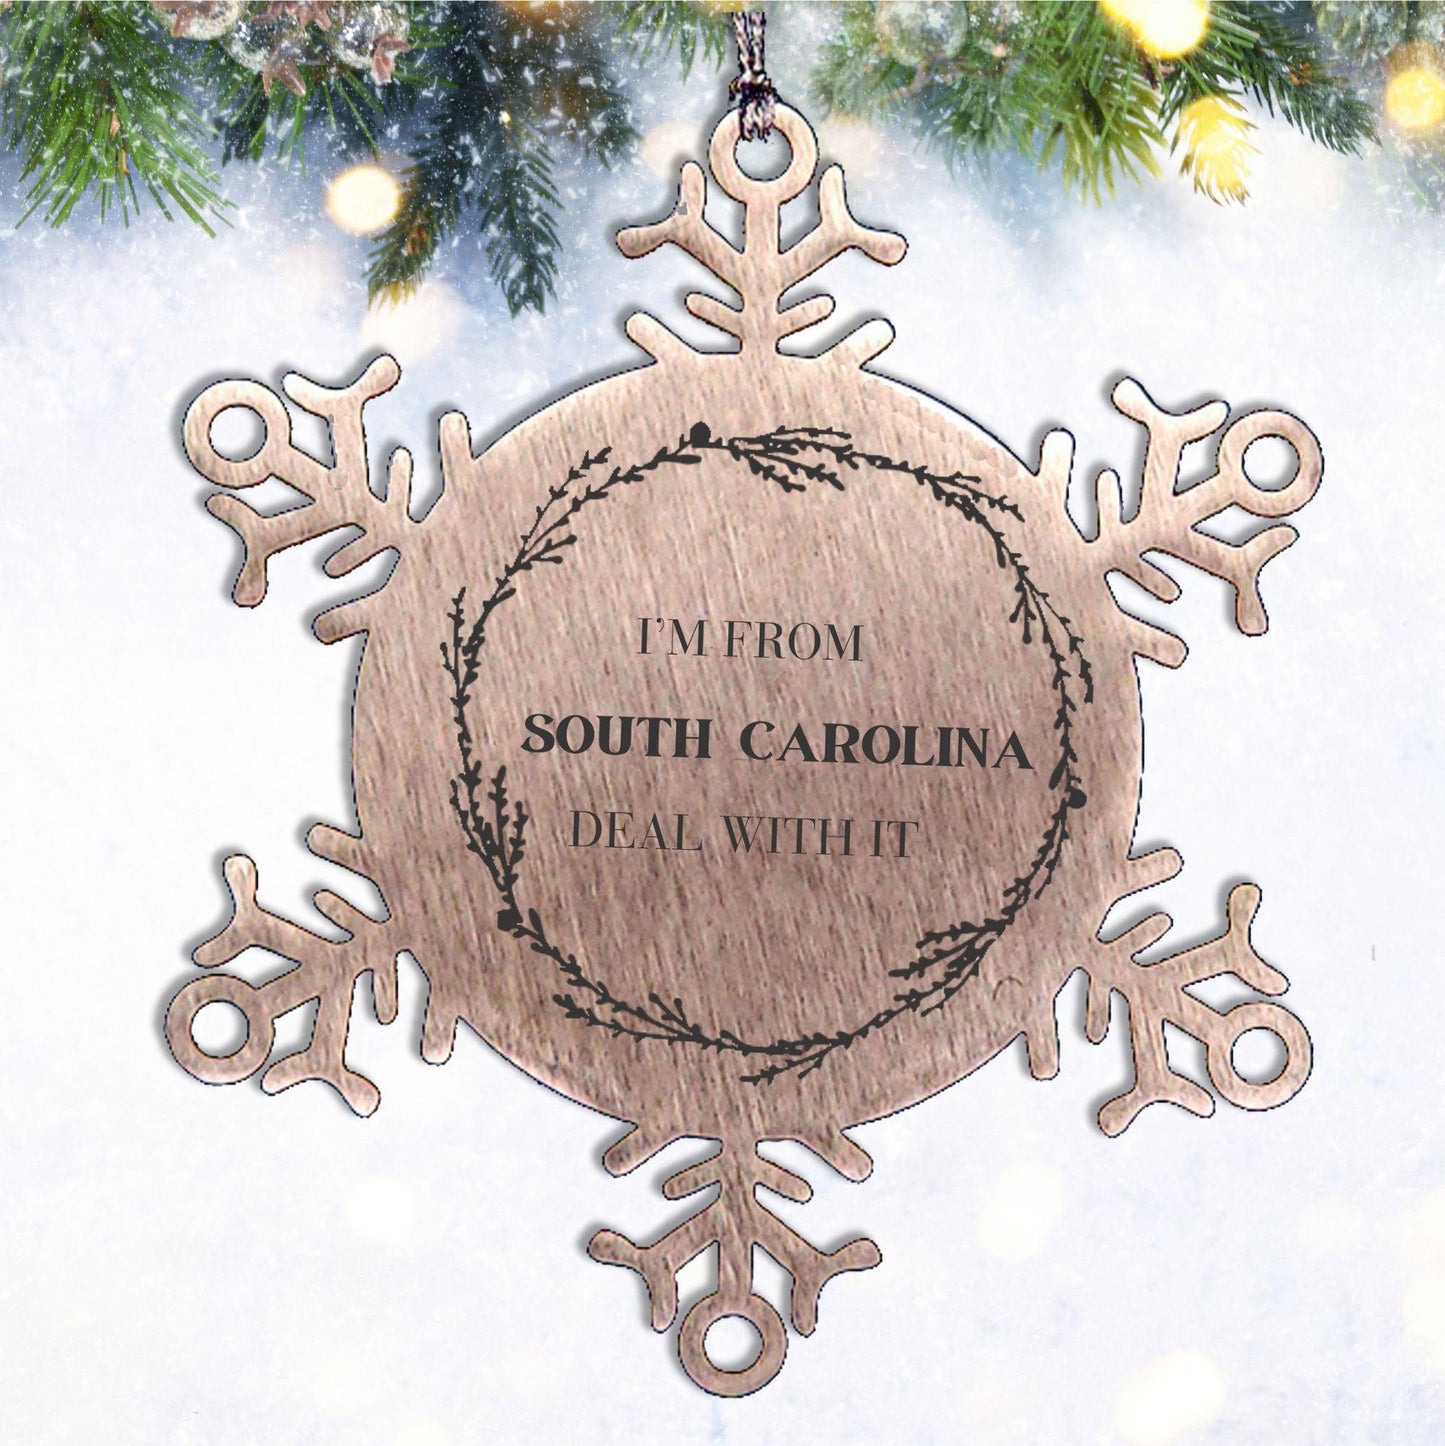 I'm from South Carolina, Deal with it, Proud South Carolina State Ornament Gifts, South Carolina Snowflake Ornament Gift Idea, Christmas Gifts for South Carolina People, Coworkers, Colleague - Mallard Moon Gift Shop